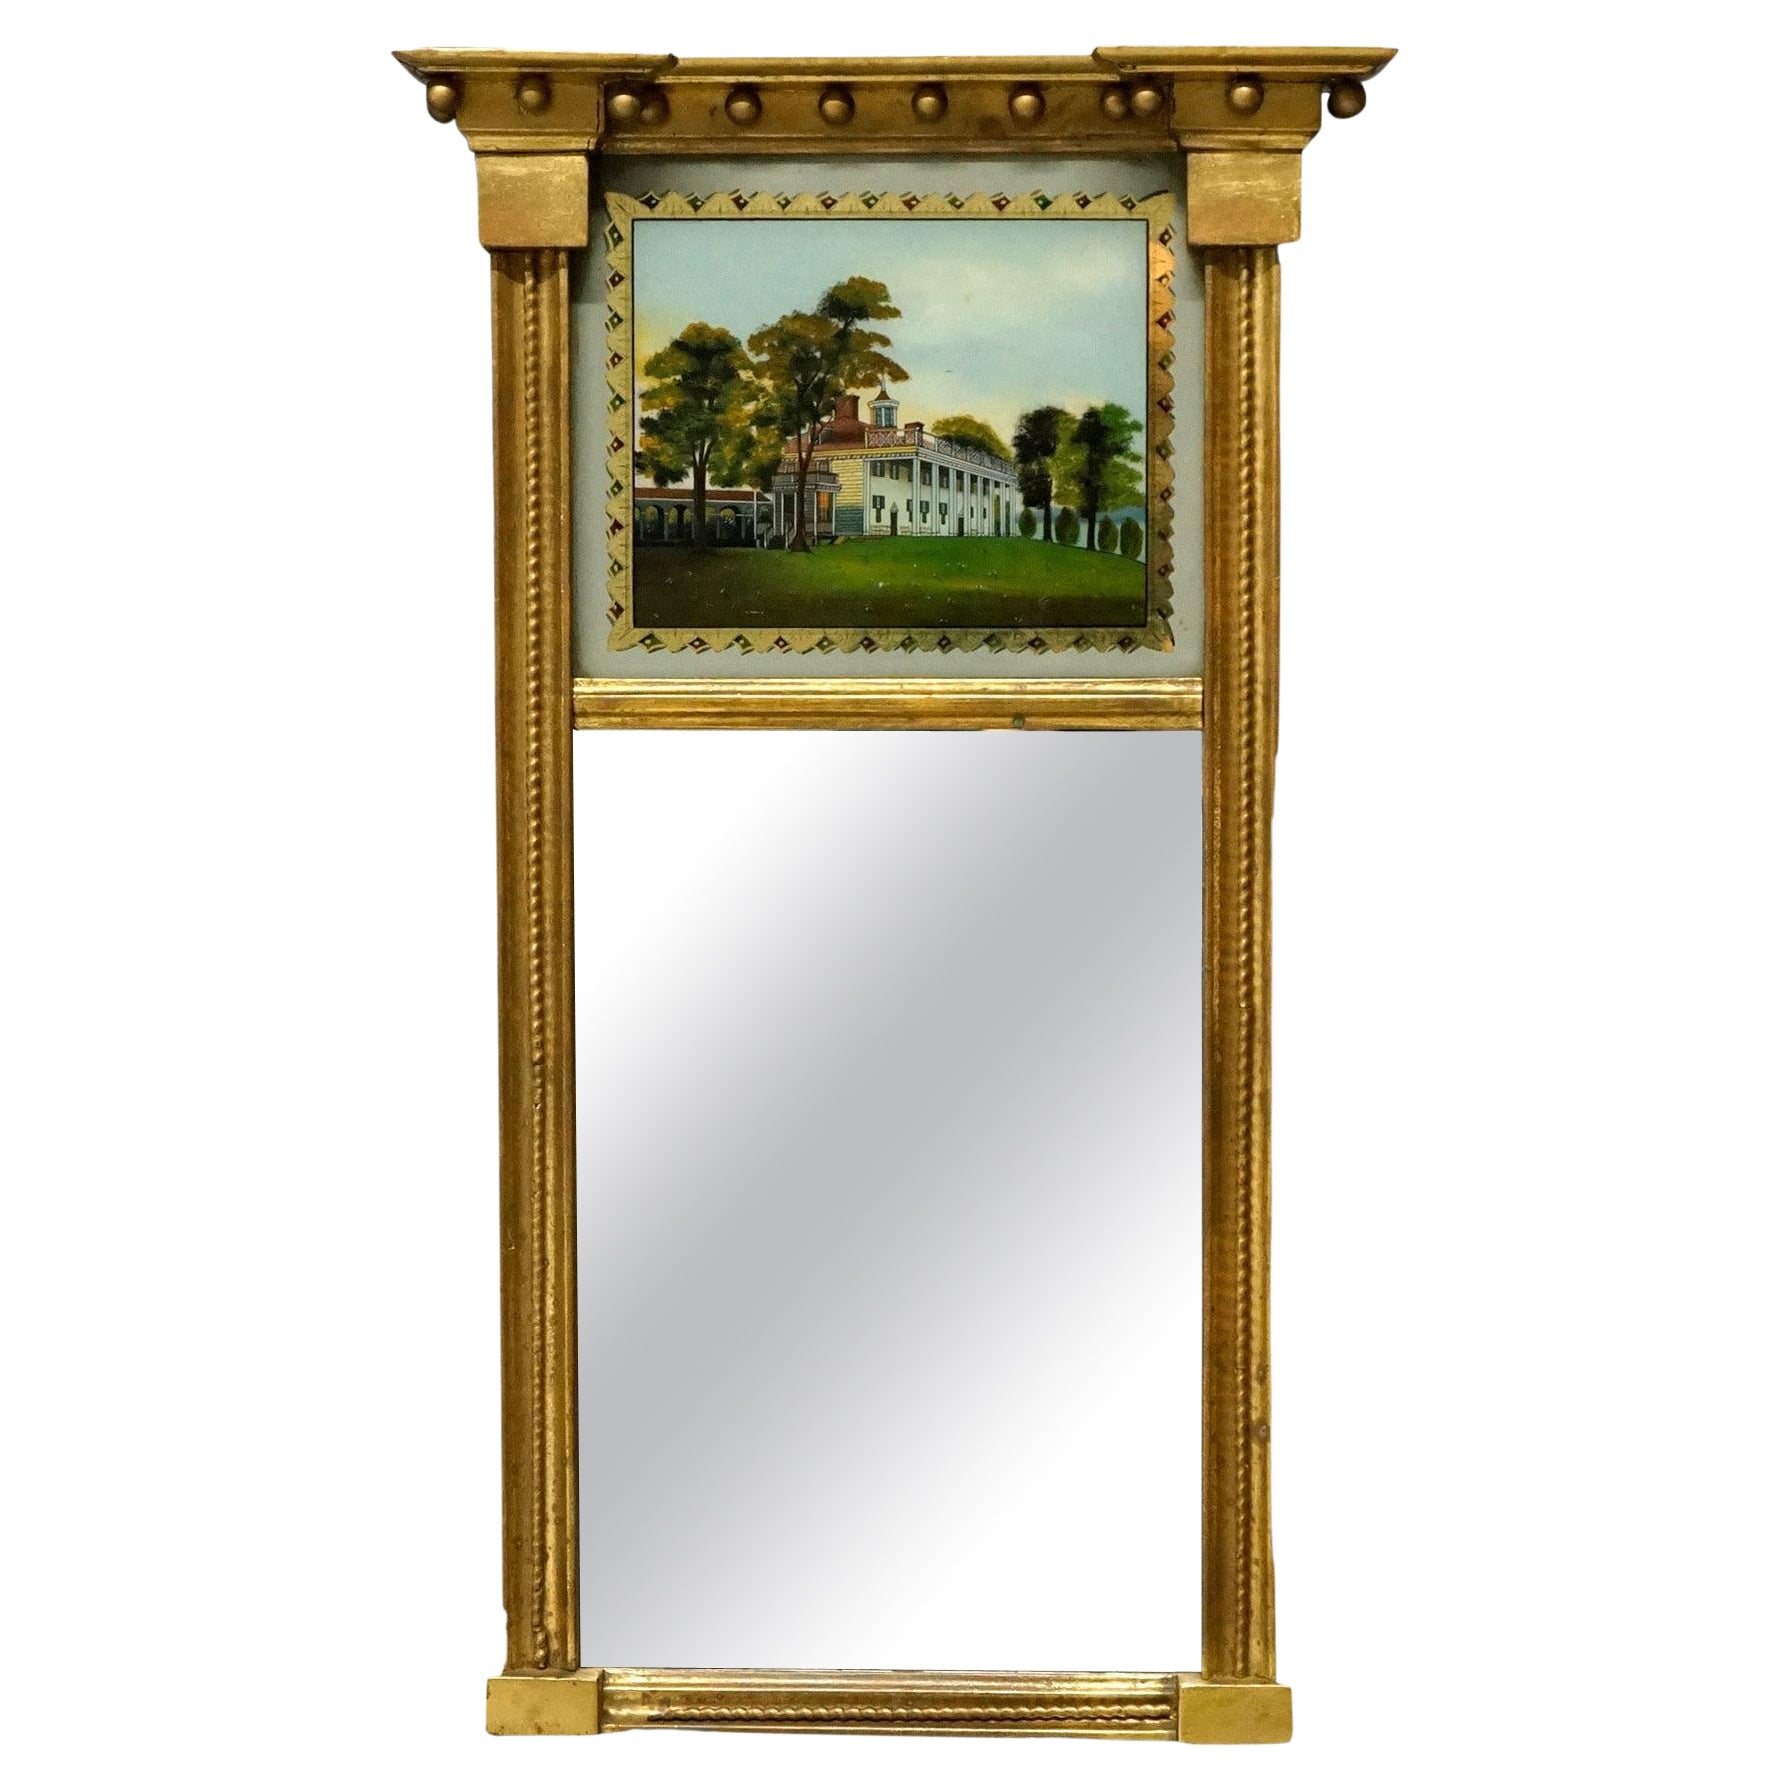 Antique Empire Reverse Painted Adams Style Giltwood Trumeau Wall Mirror 19th C